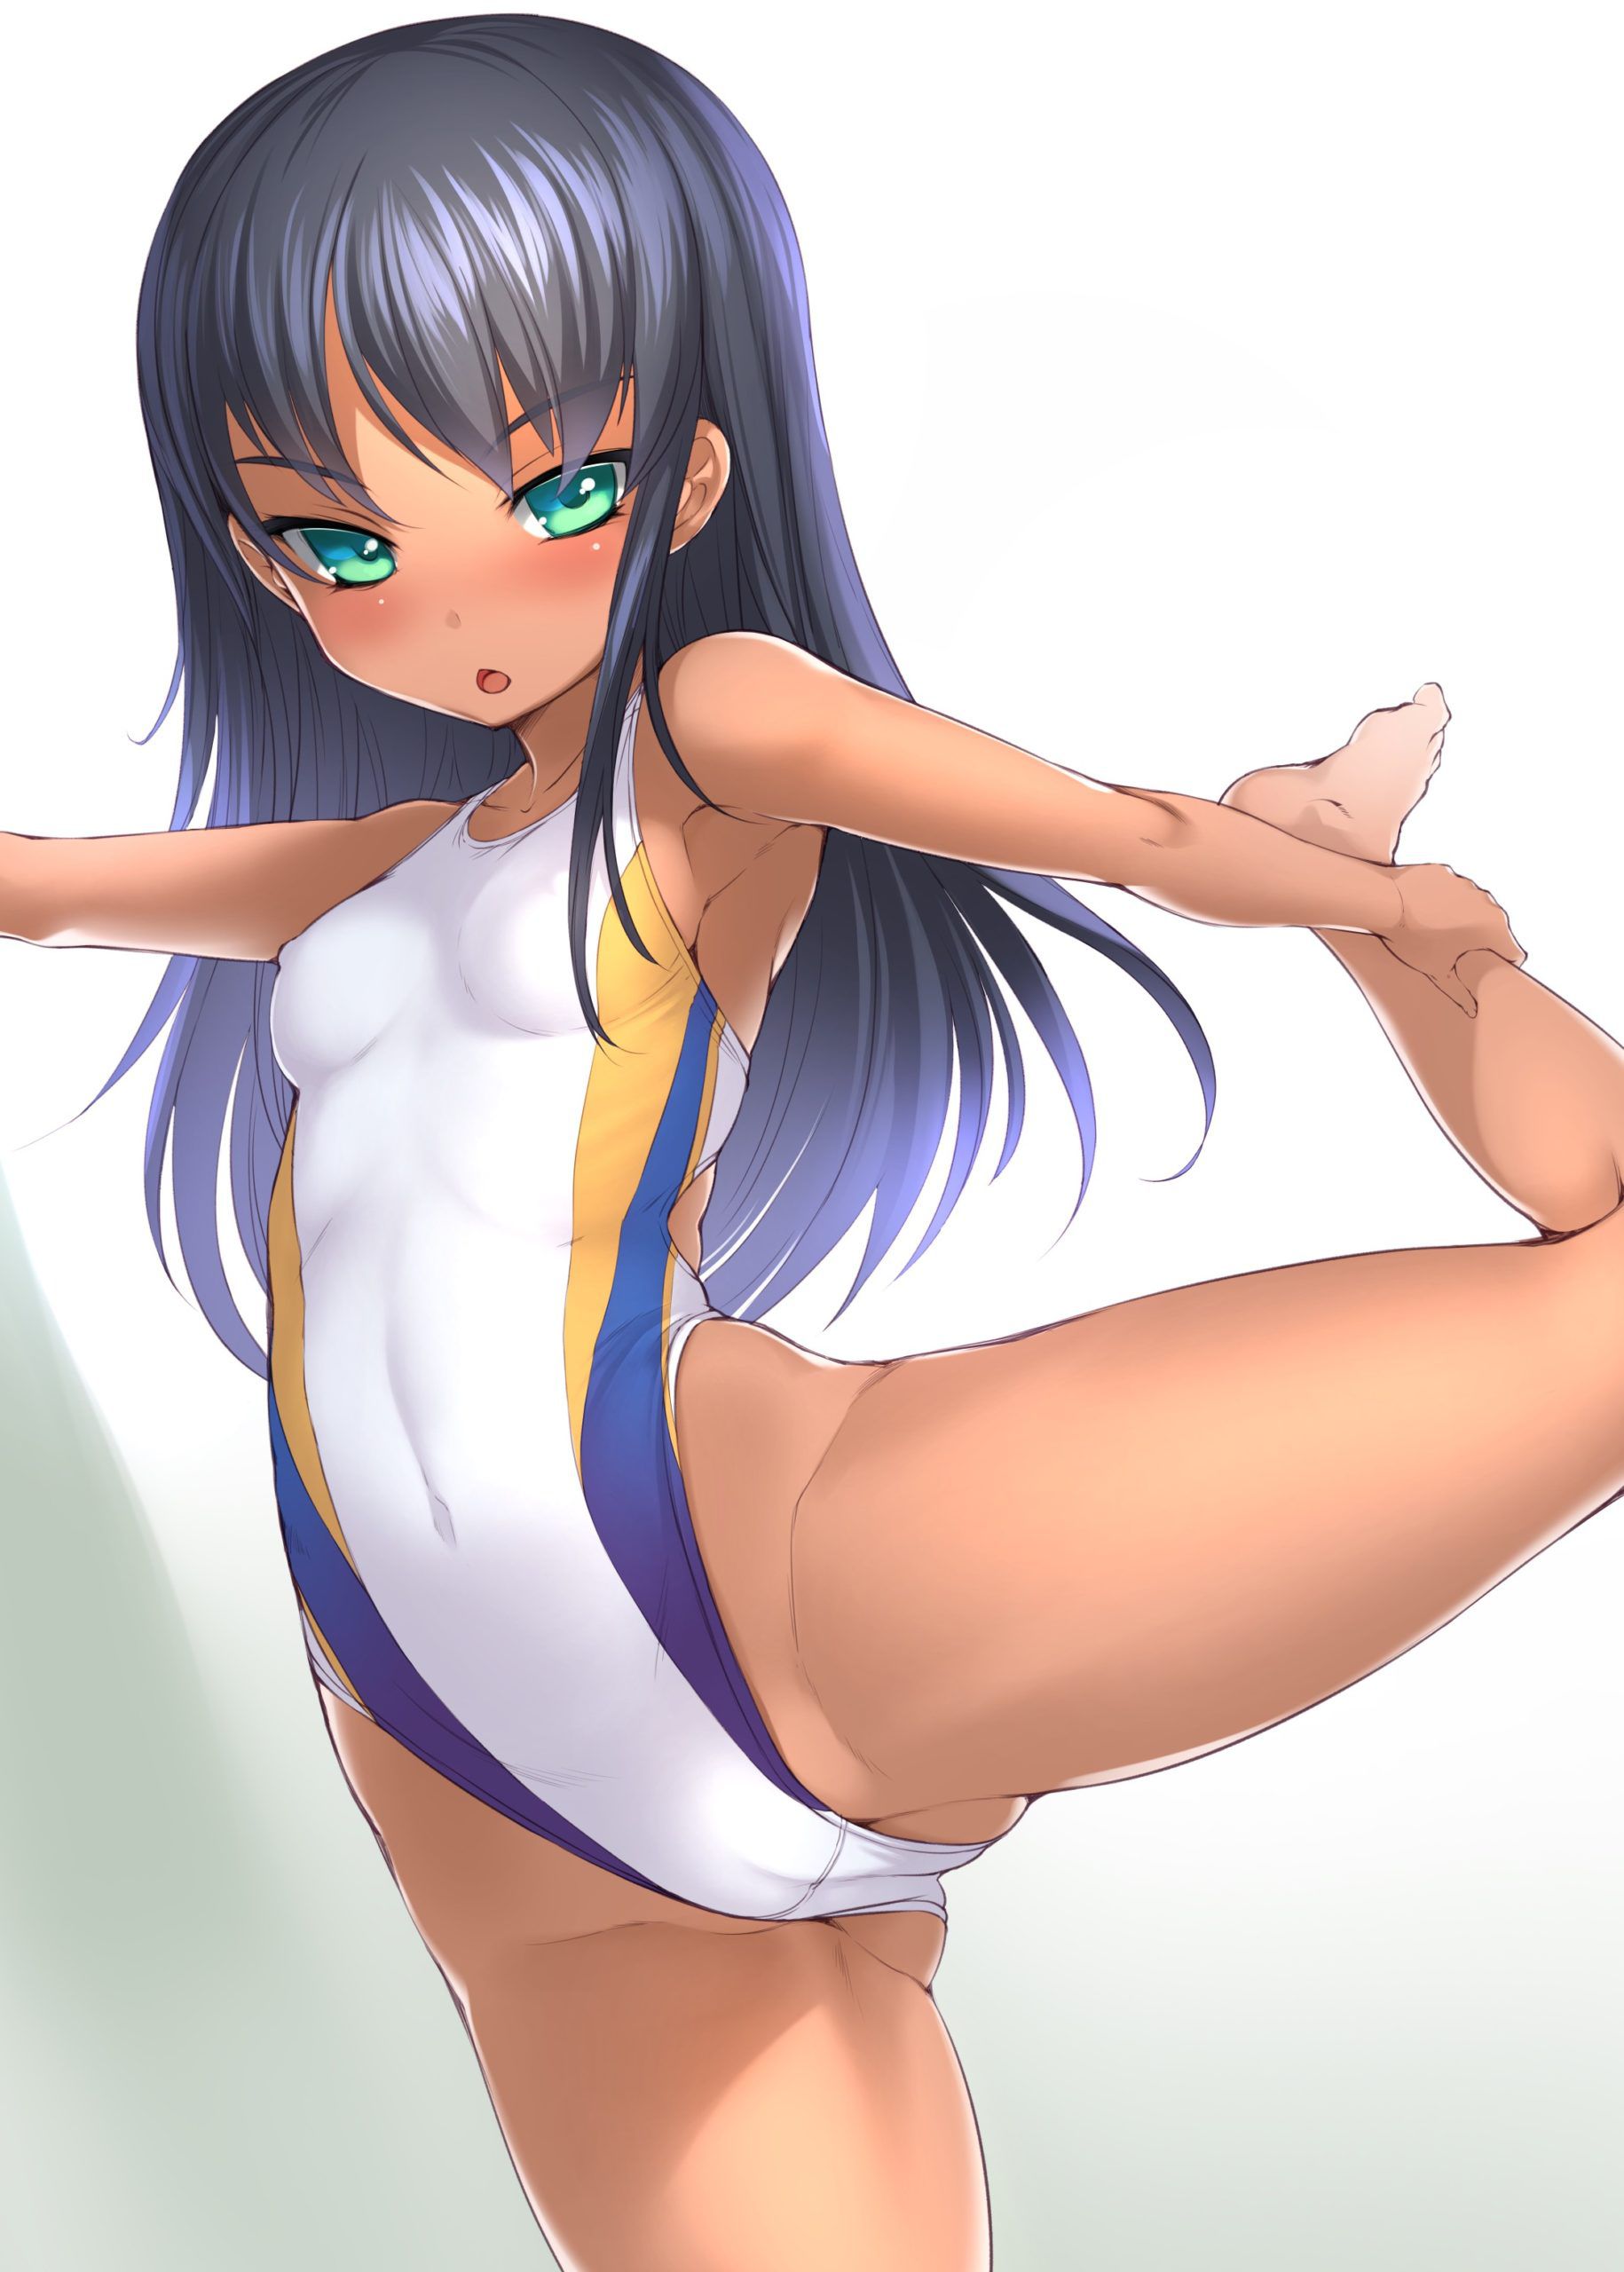 【2nd】Erotic image of a girl in a swimsuit Part 13 21